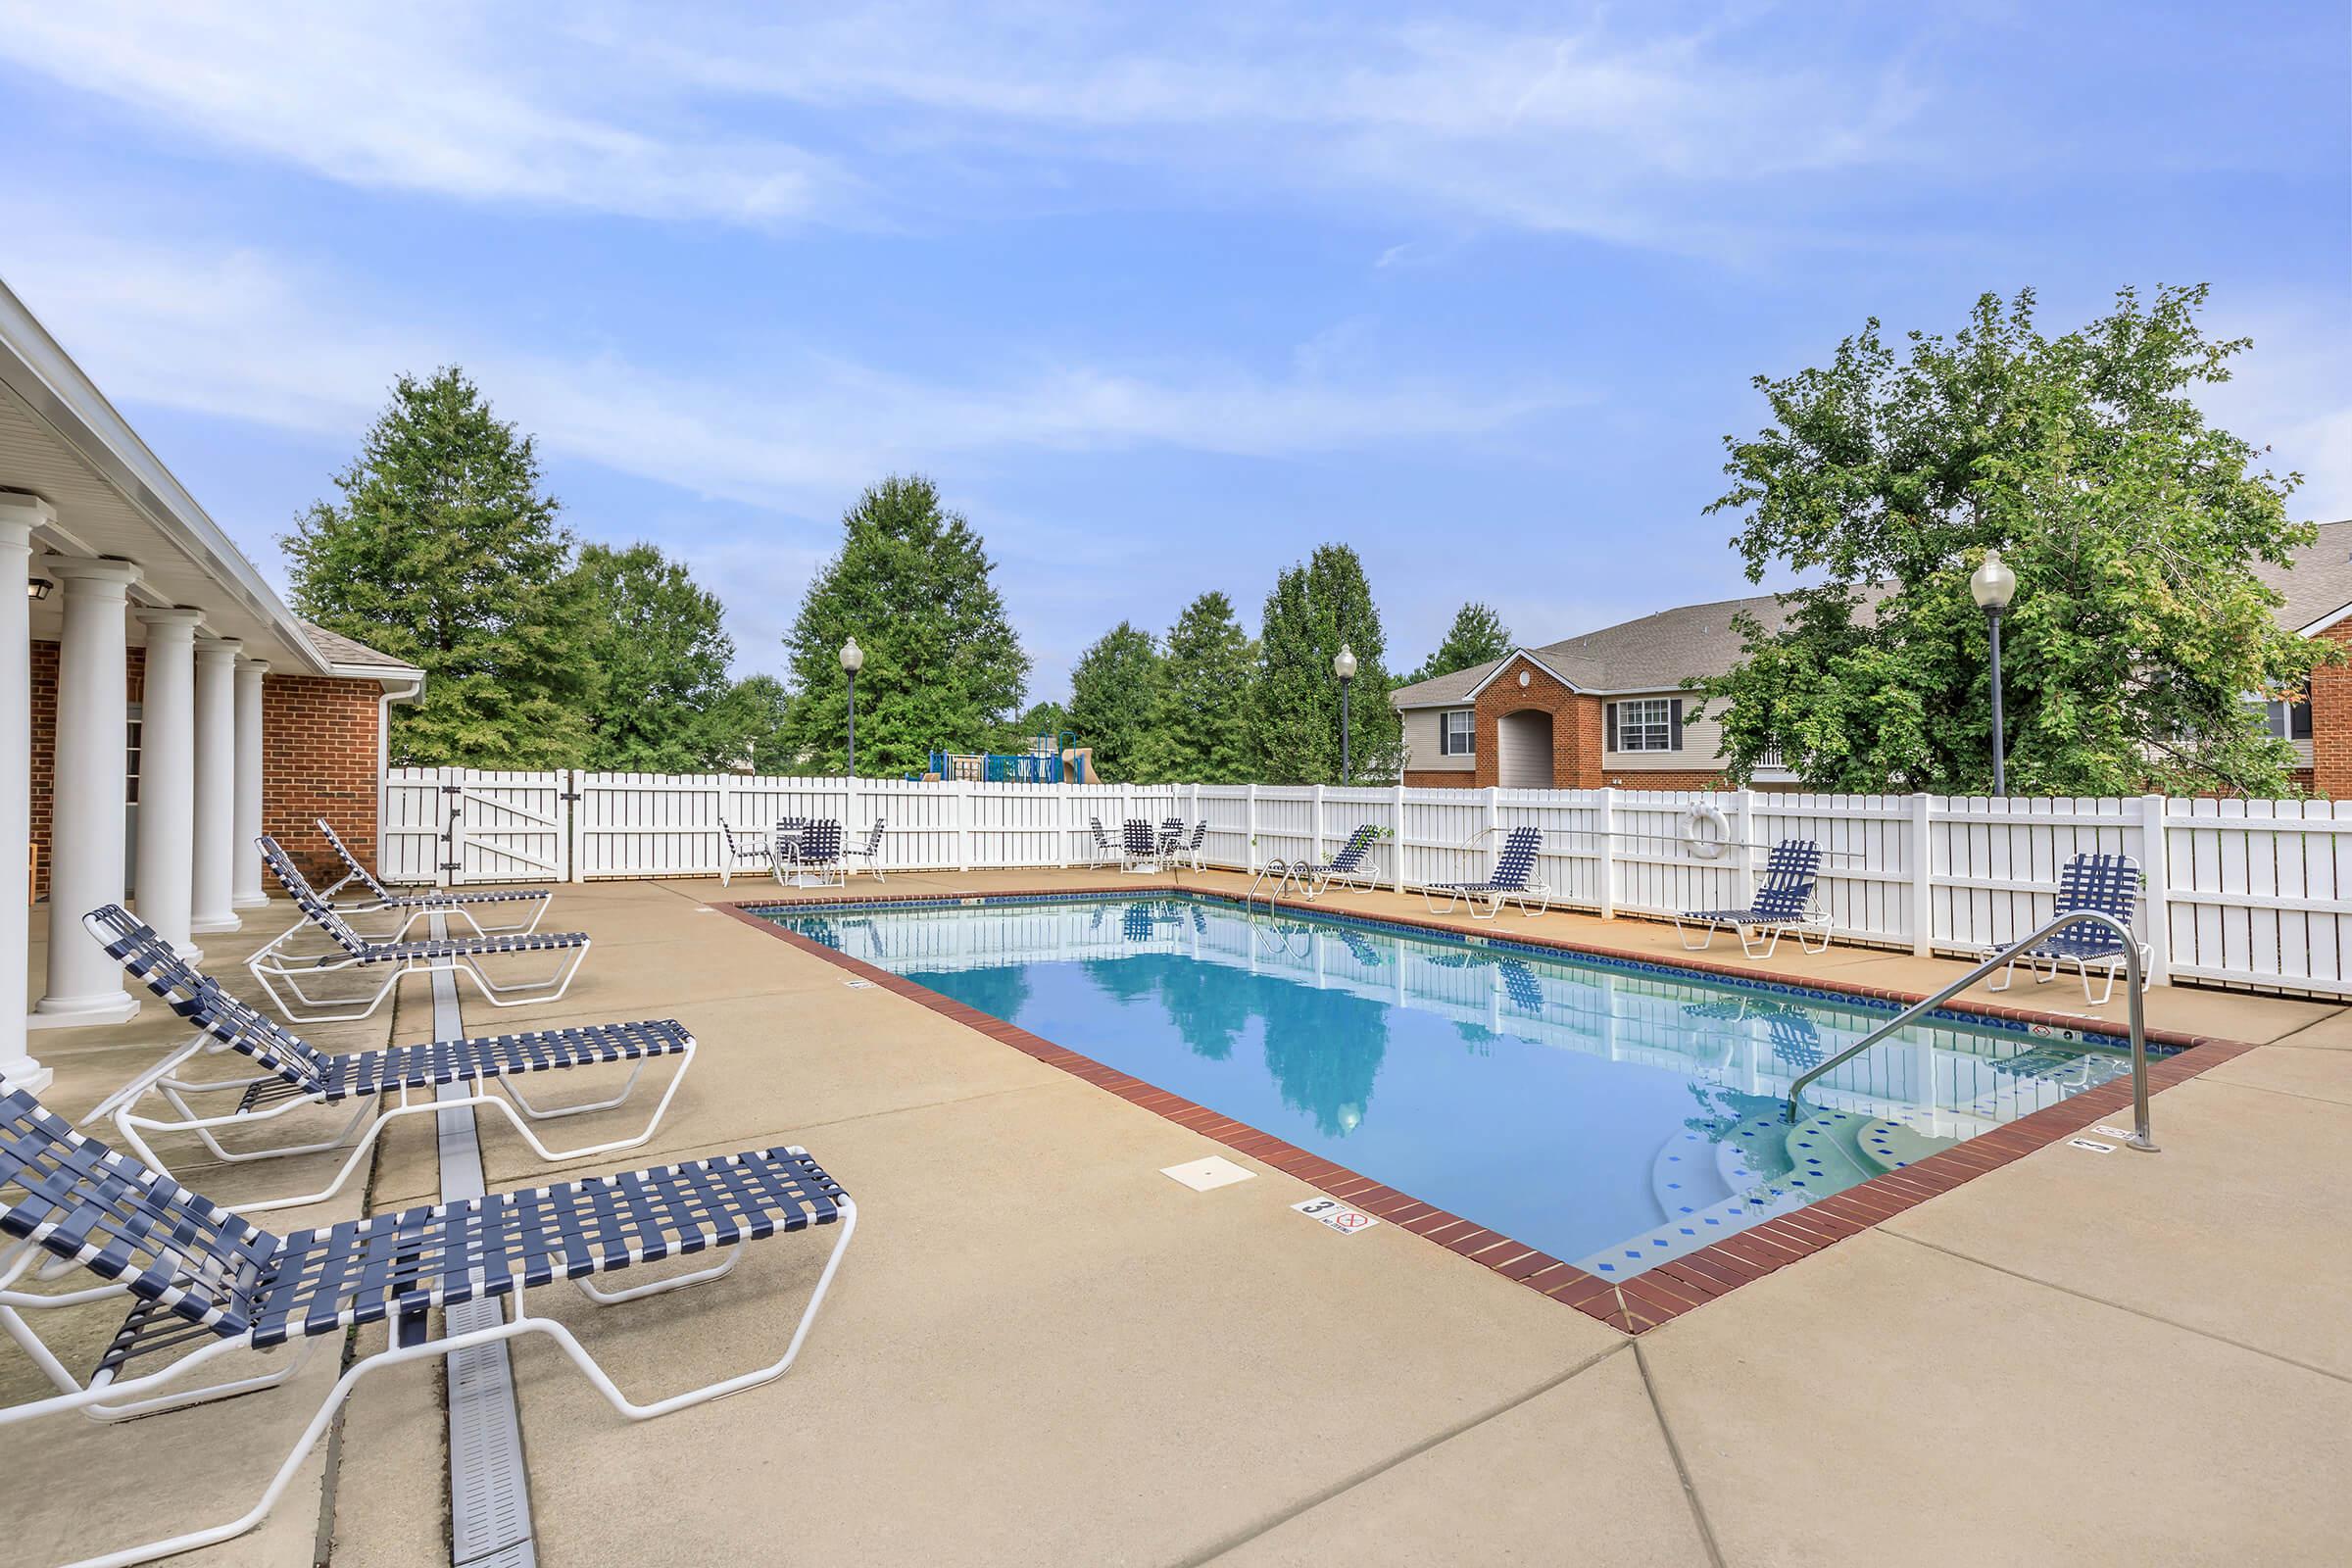 Lounge by the pool at Lakeshore Crossing Apartments